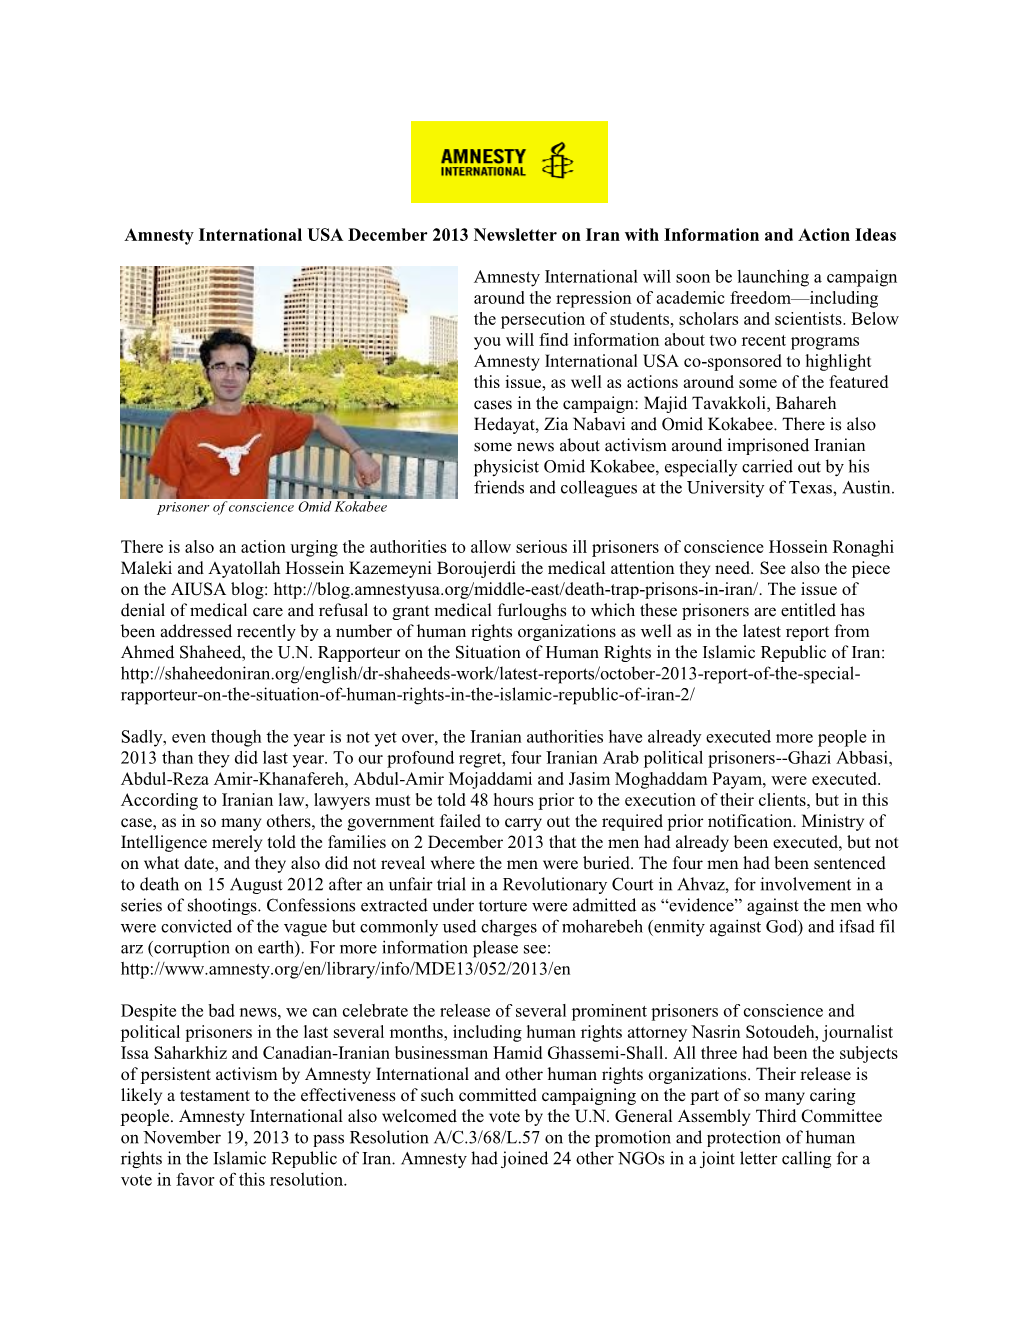 Amnesty International USA December 2013 Newsletter on Iran with Information and Action Ideas